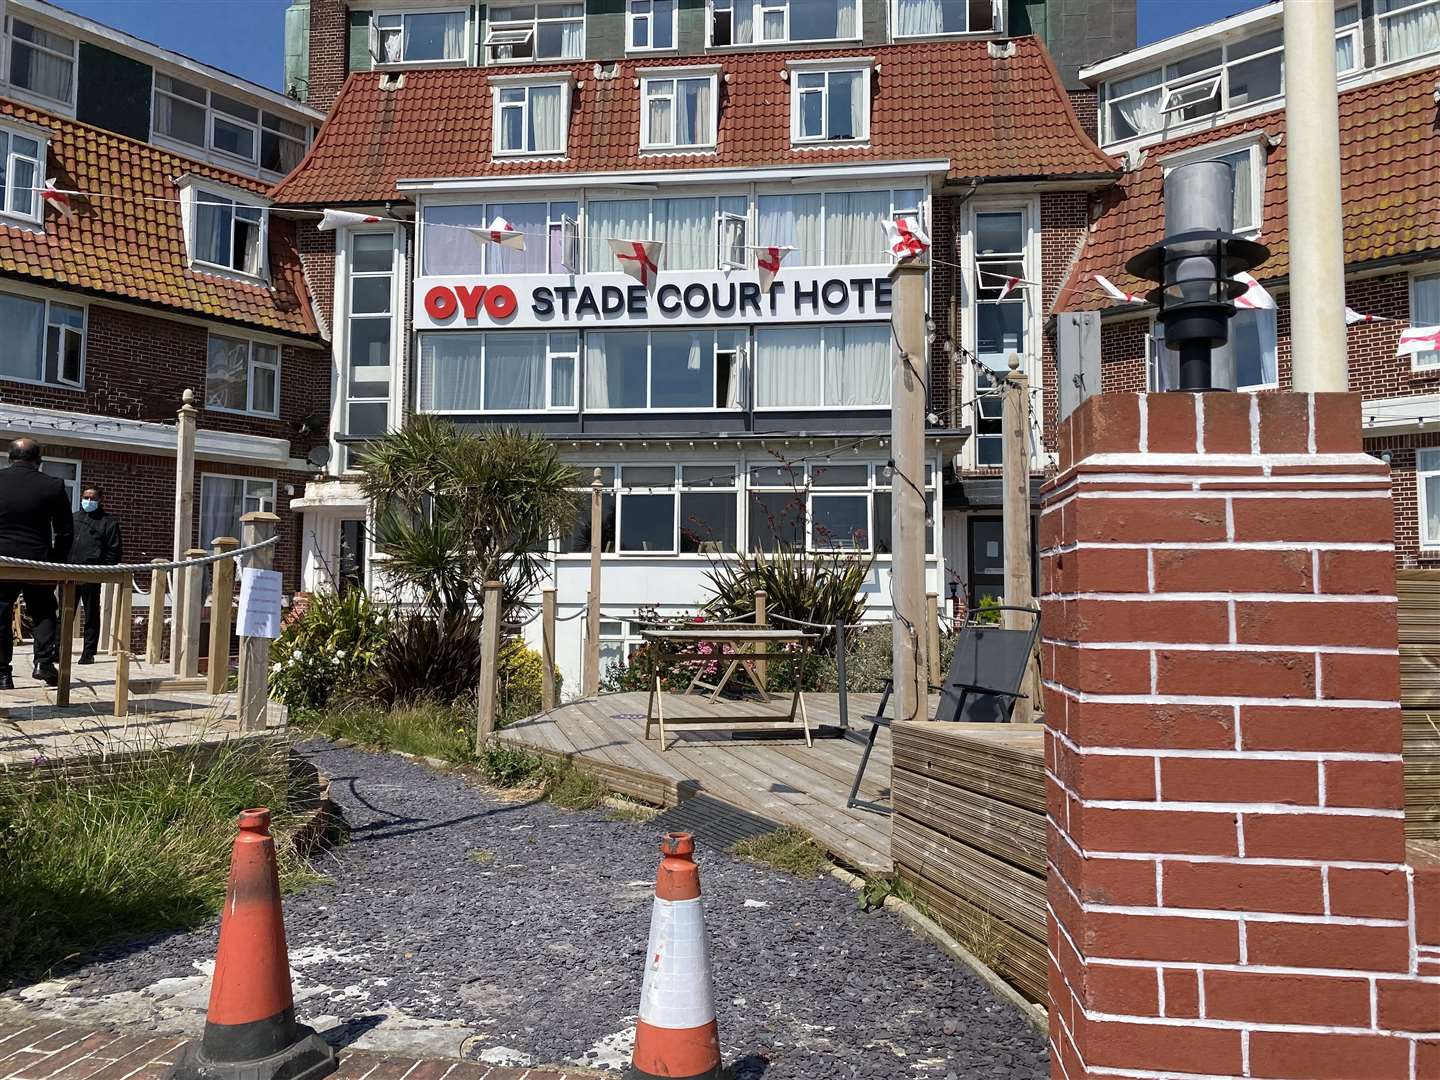 The Stade Court Hotel, Hythe, has been used for asylum seekers. Photo from KM reporter